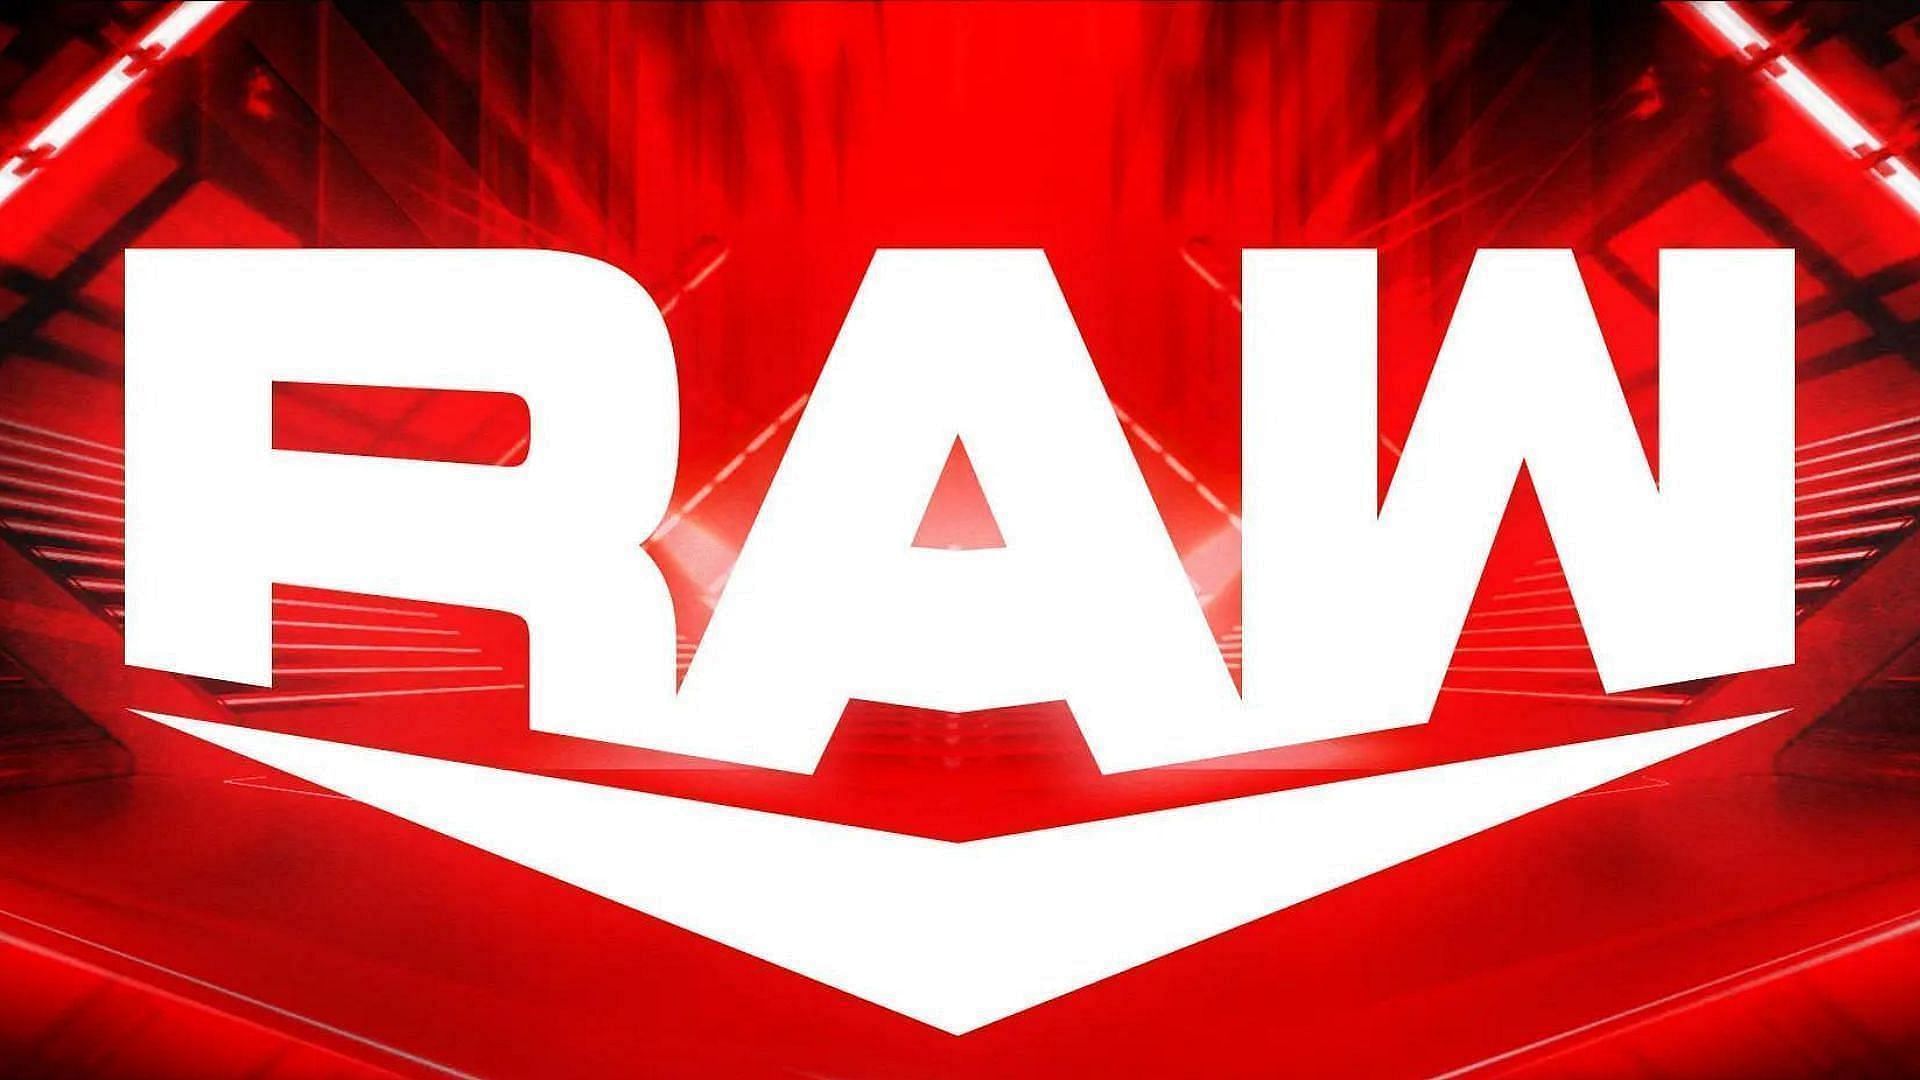 WWE RAW has been on the air since January 11, 1993. 